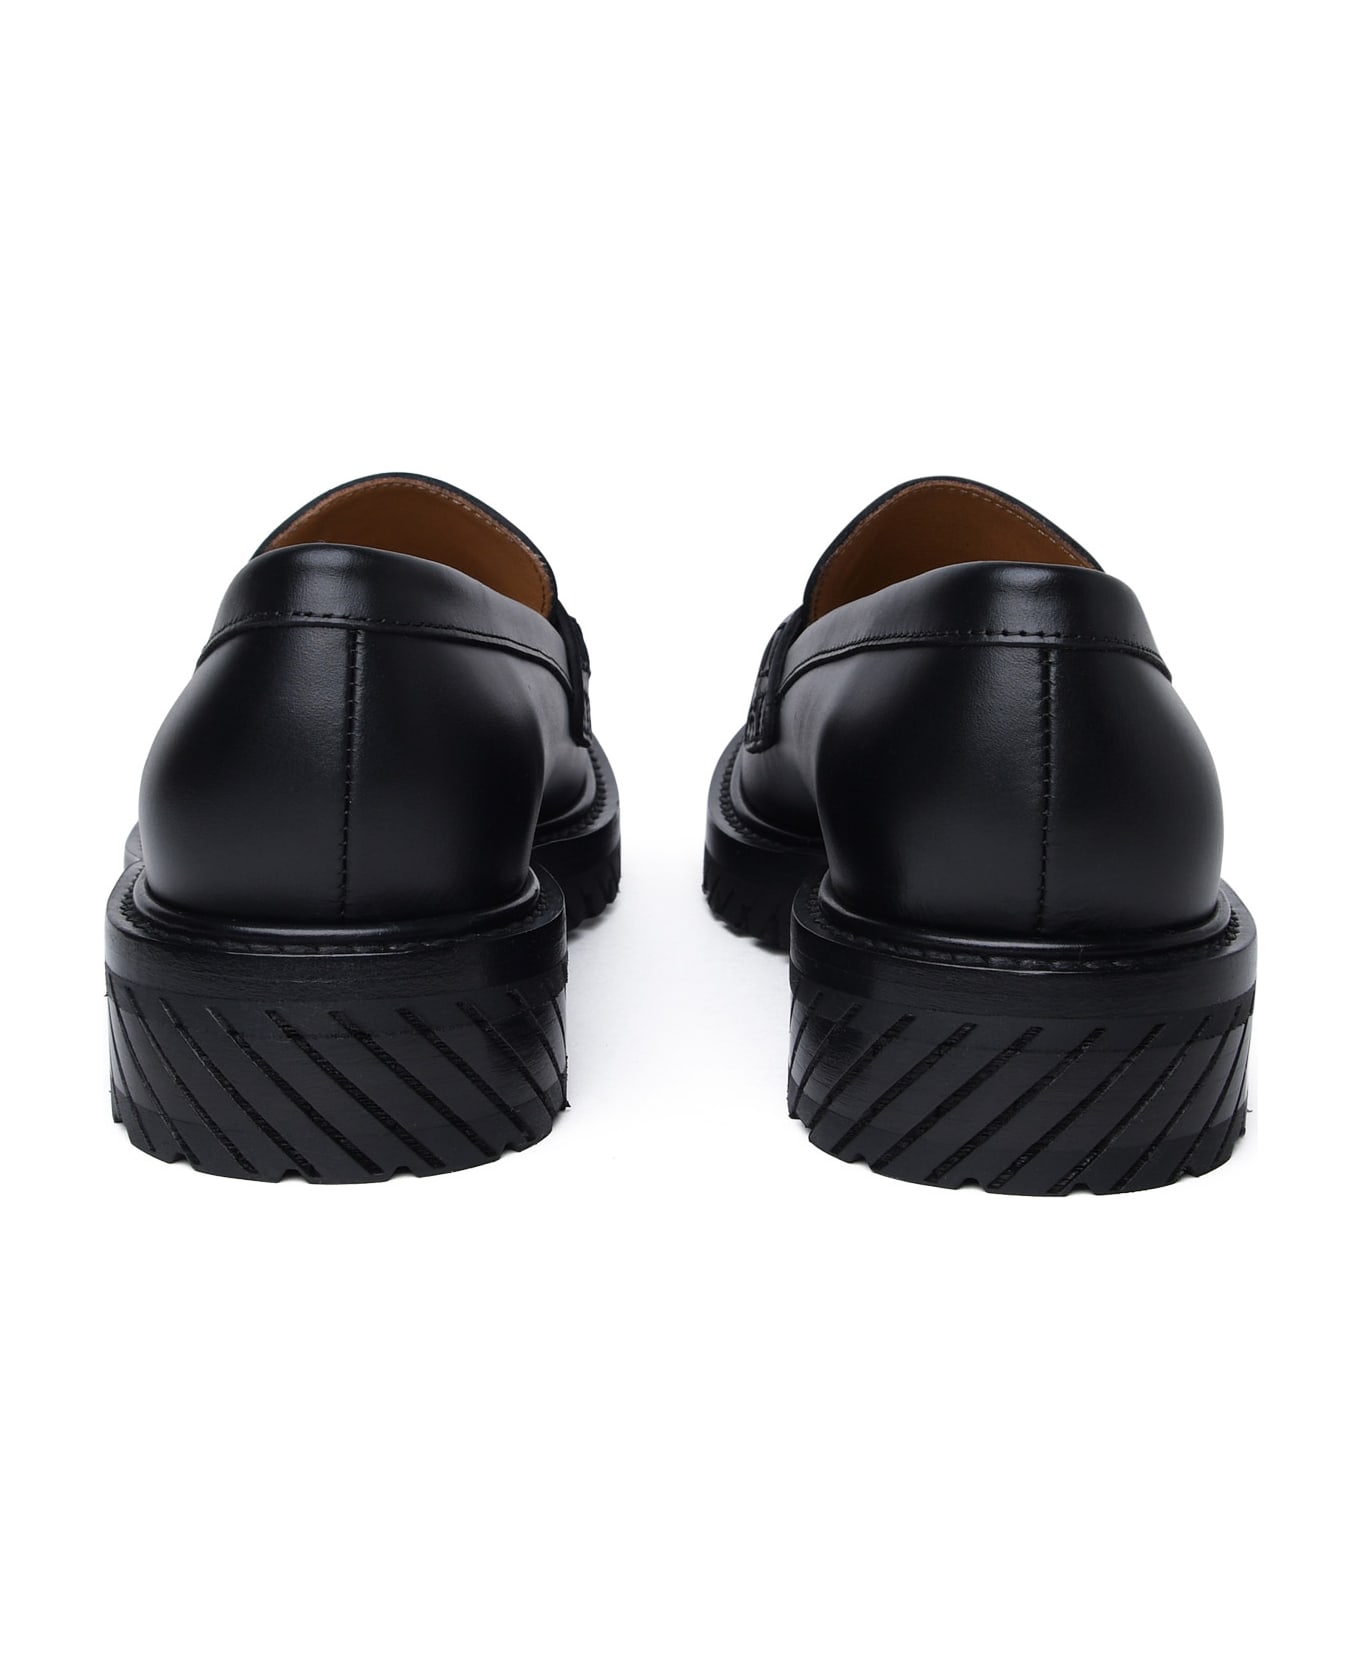 Off-White Leather Loafers - Black